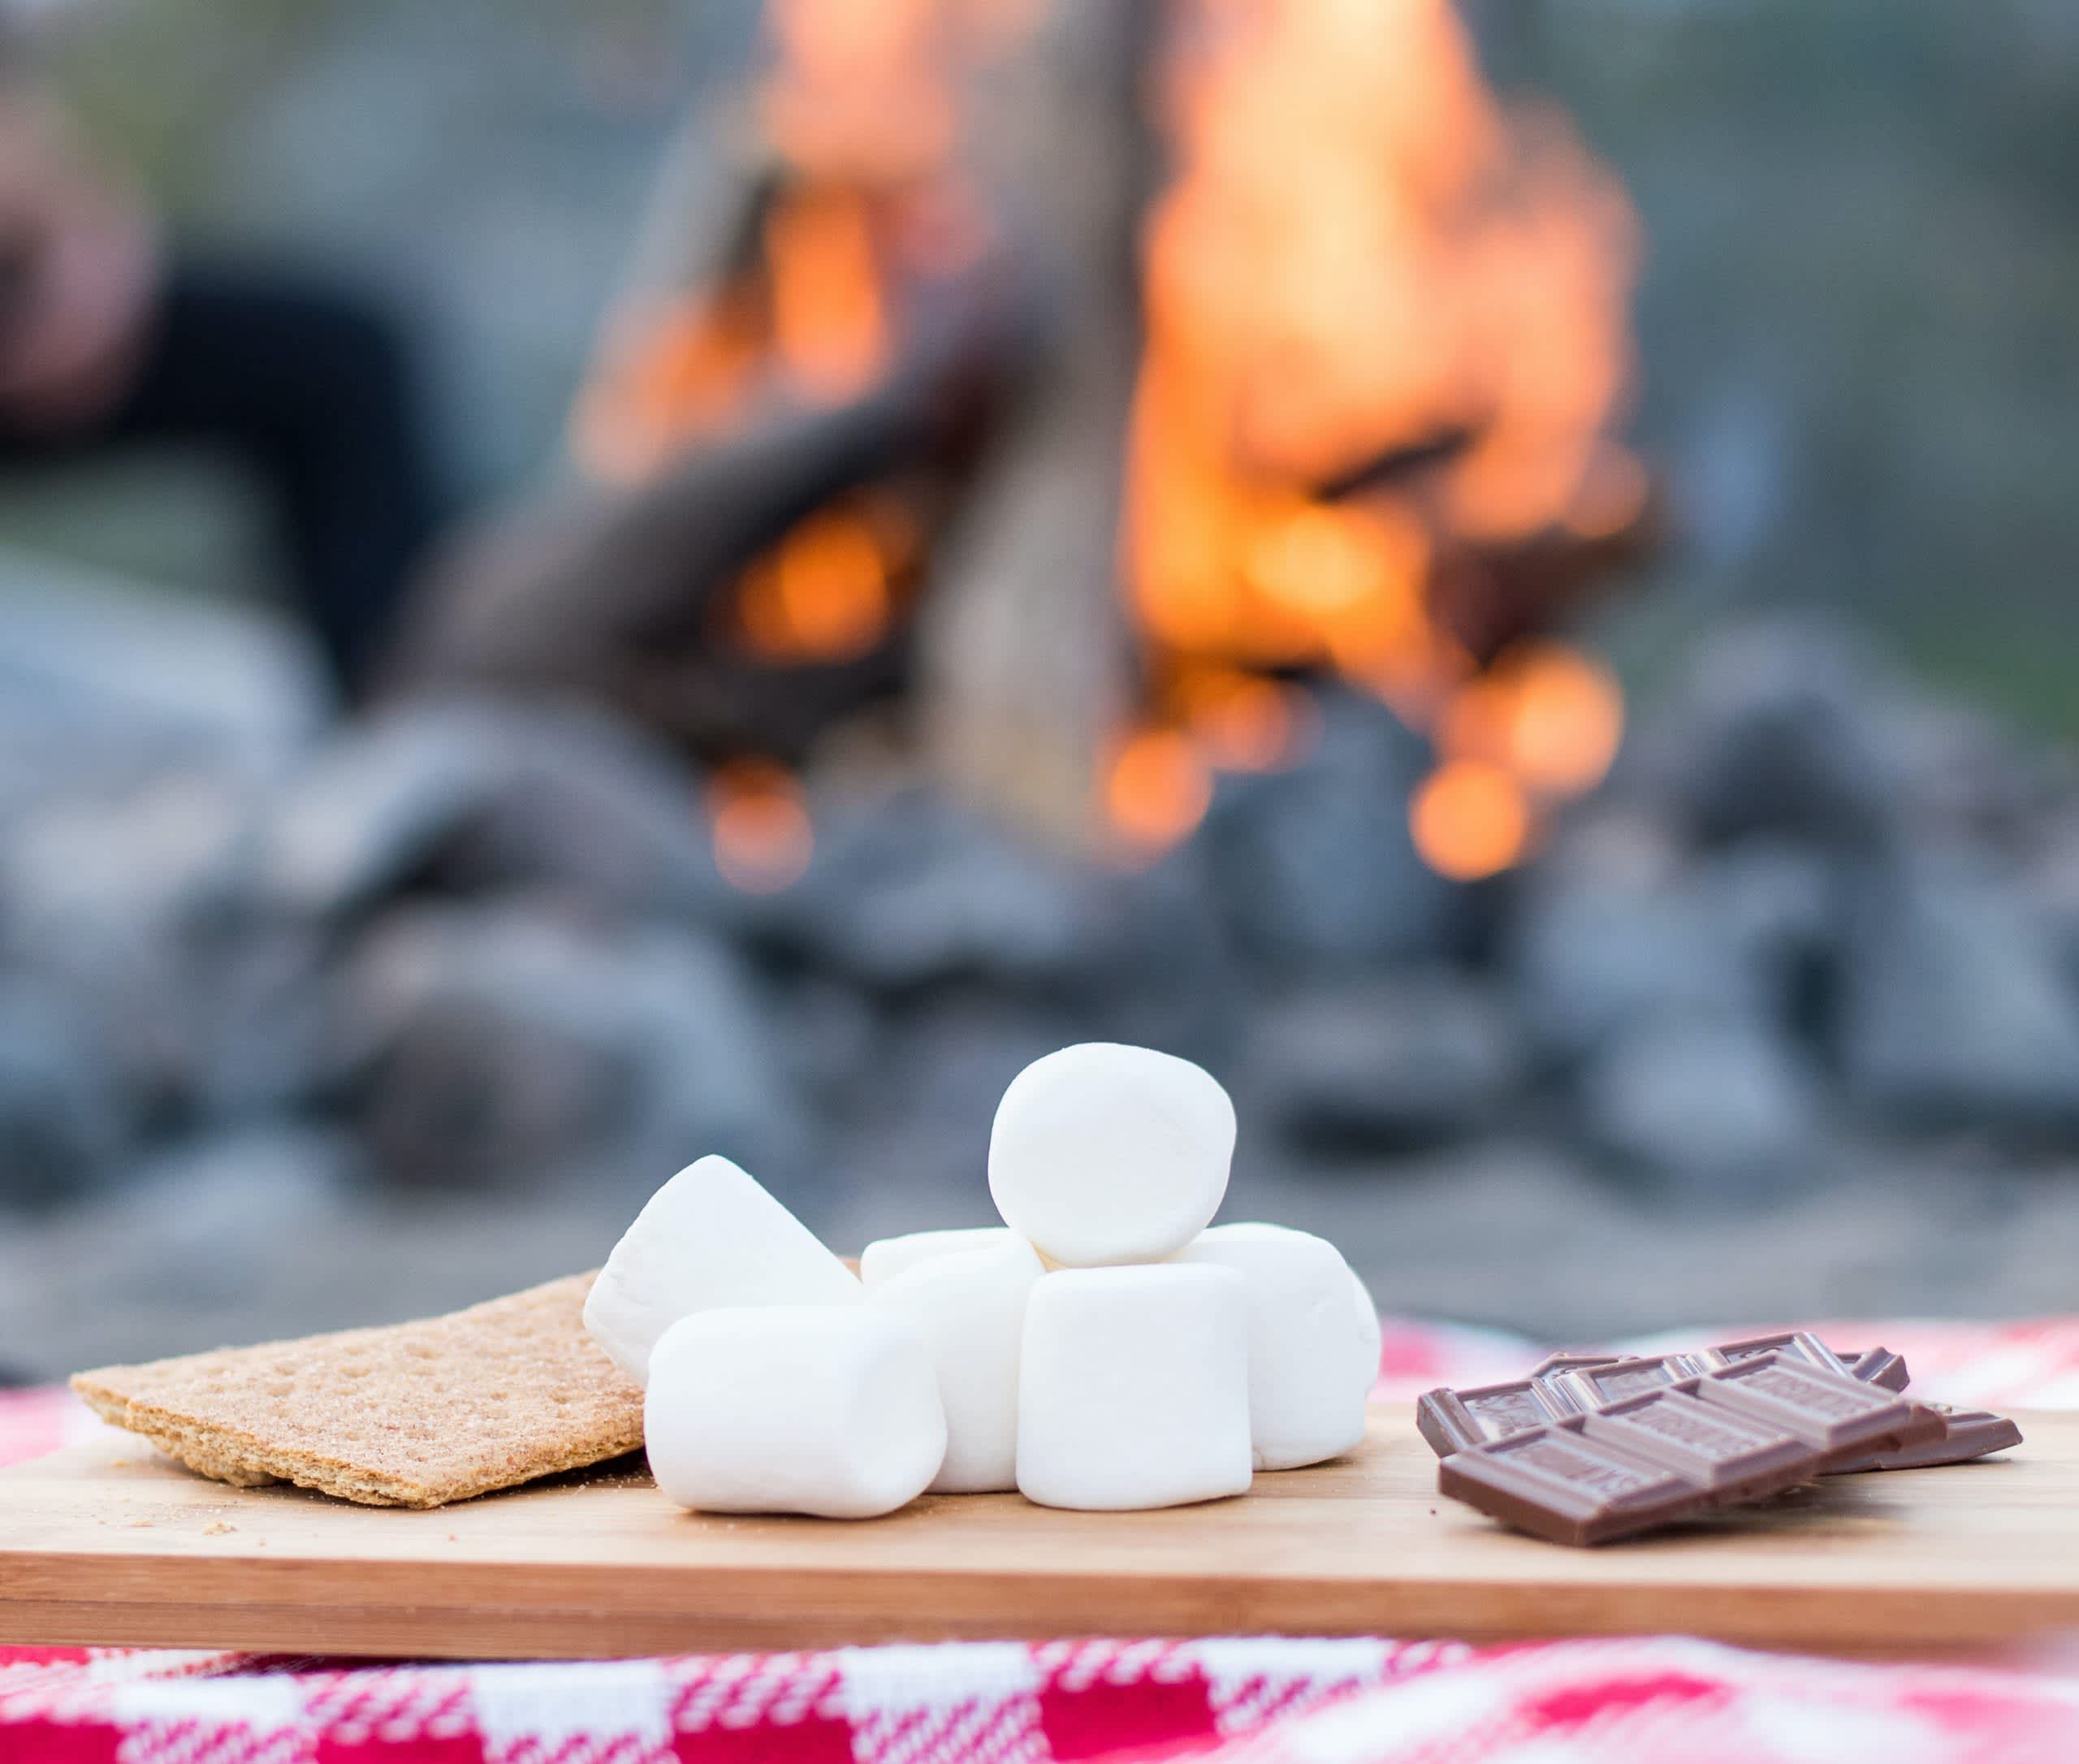 S'mores ingredients by a summer campfire